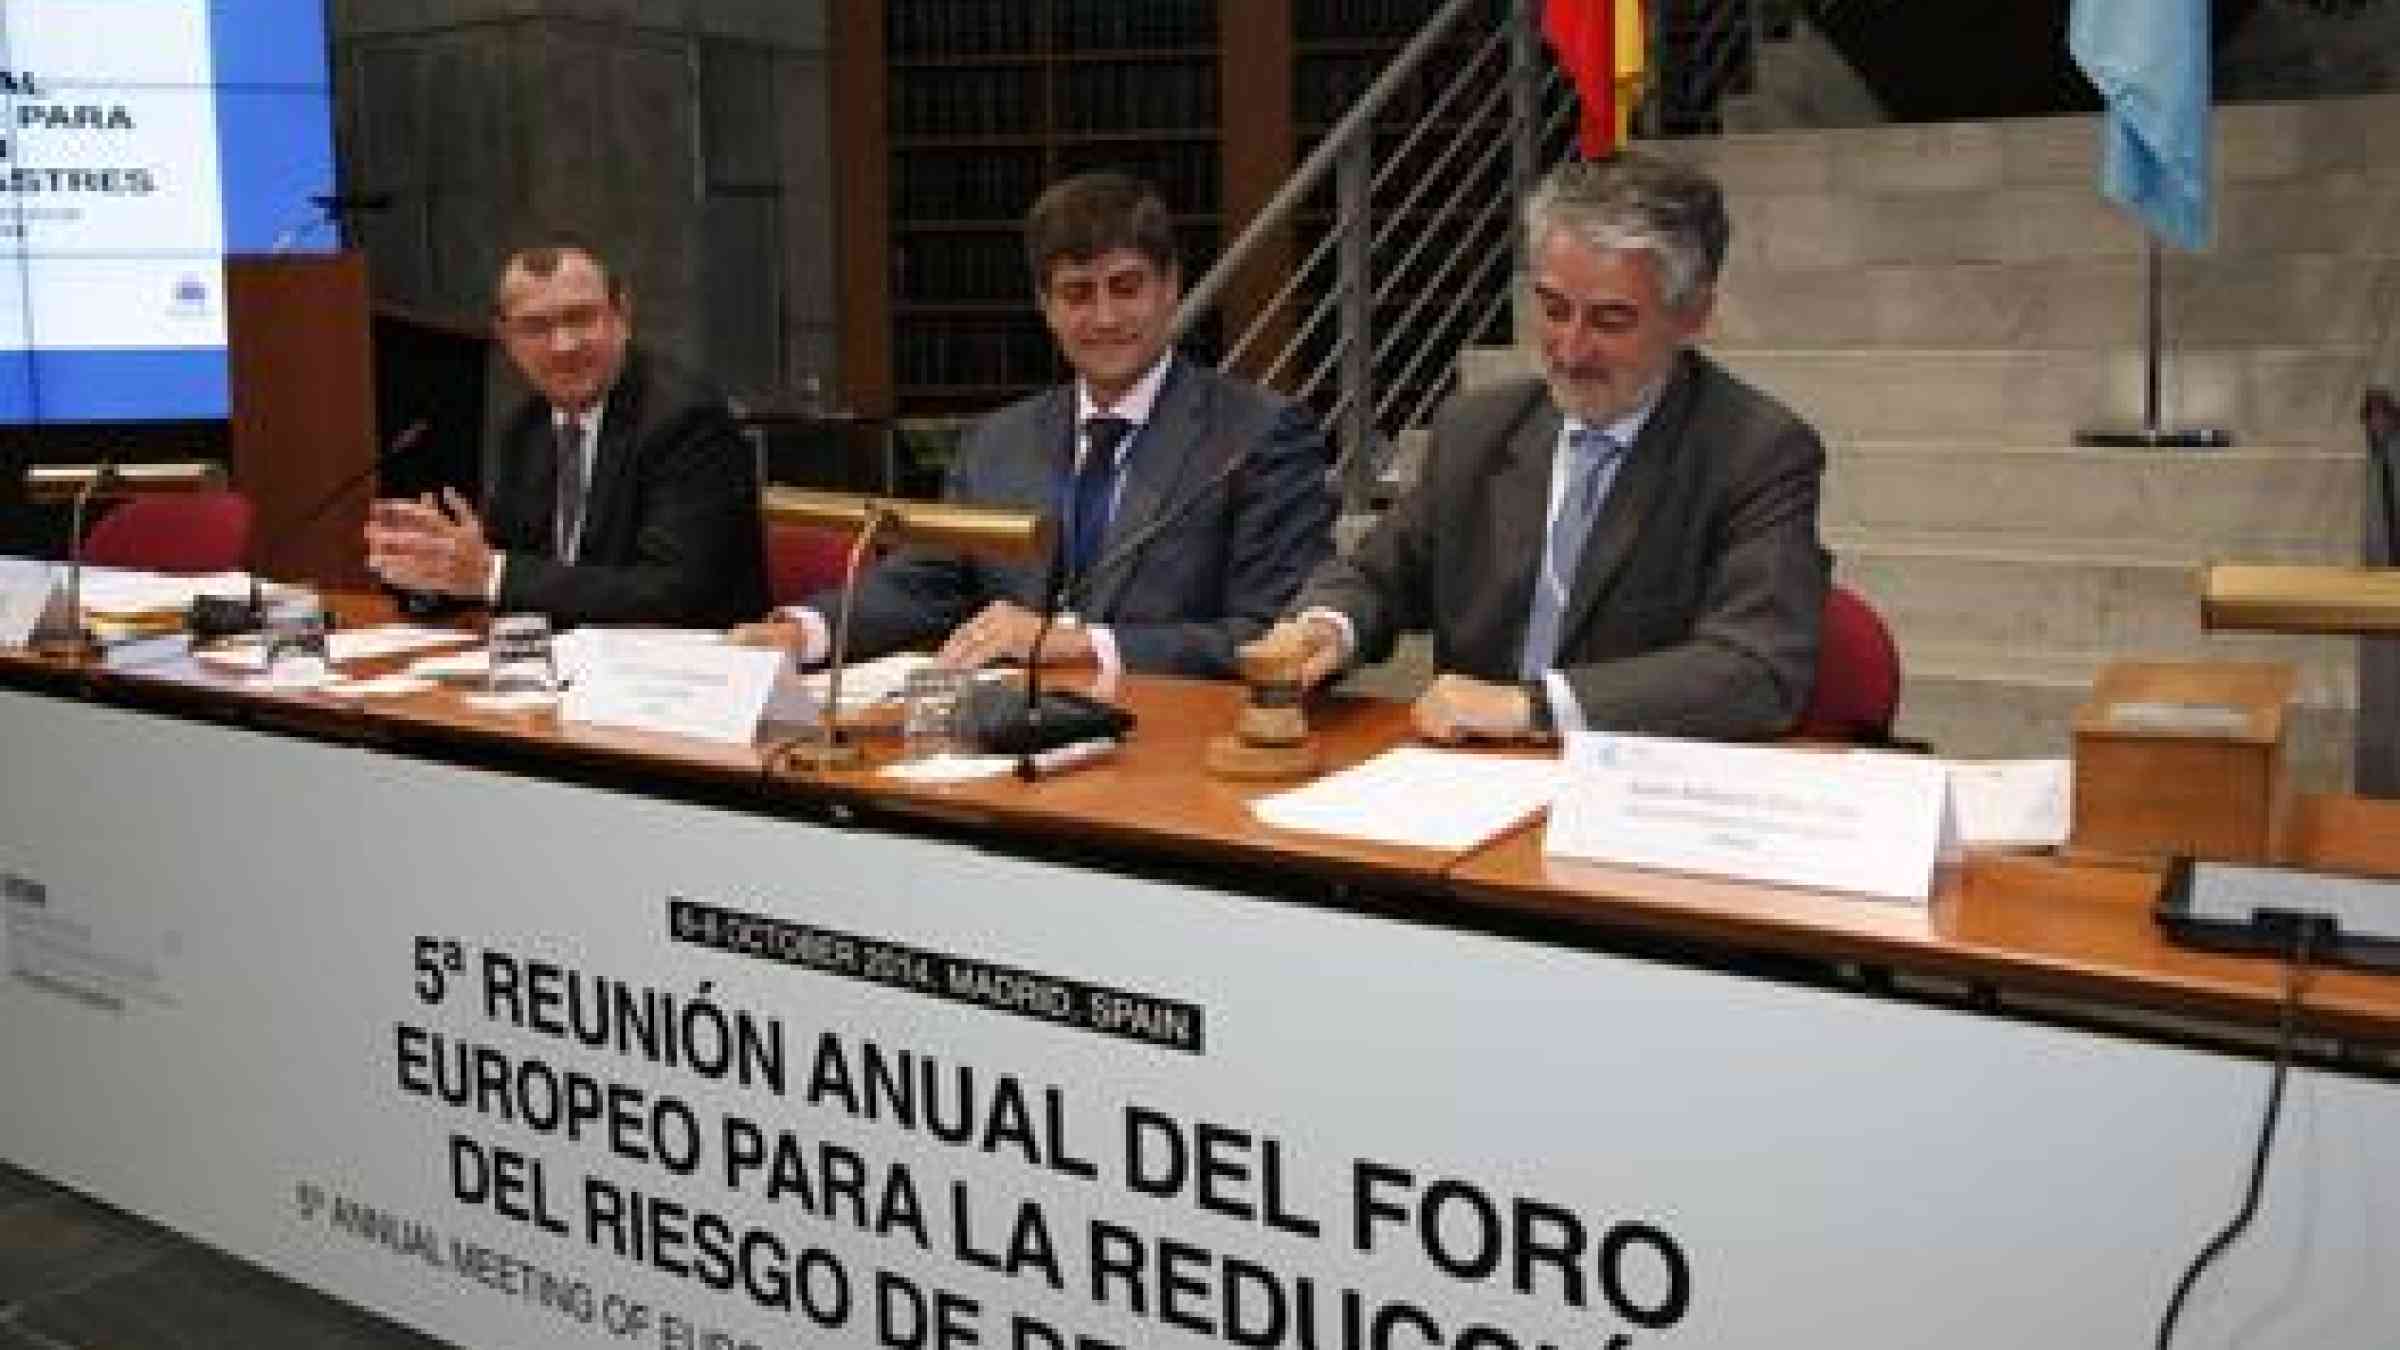 Juan Antonio Diaz Cruz, Director of Human Protection, Spain, brings down the hammer at the close of the 5th European Forum for Disaster Risk Reduction in Madrid today, flanked by co-chairs of the meeting, Daniel Cano of Spain and Marc Jacquet of France. (Photo: Luis Zazo Sánchez, Direccion General de Protección Civil y Emergencias)